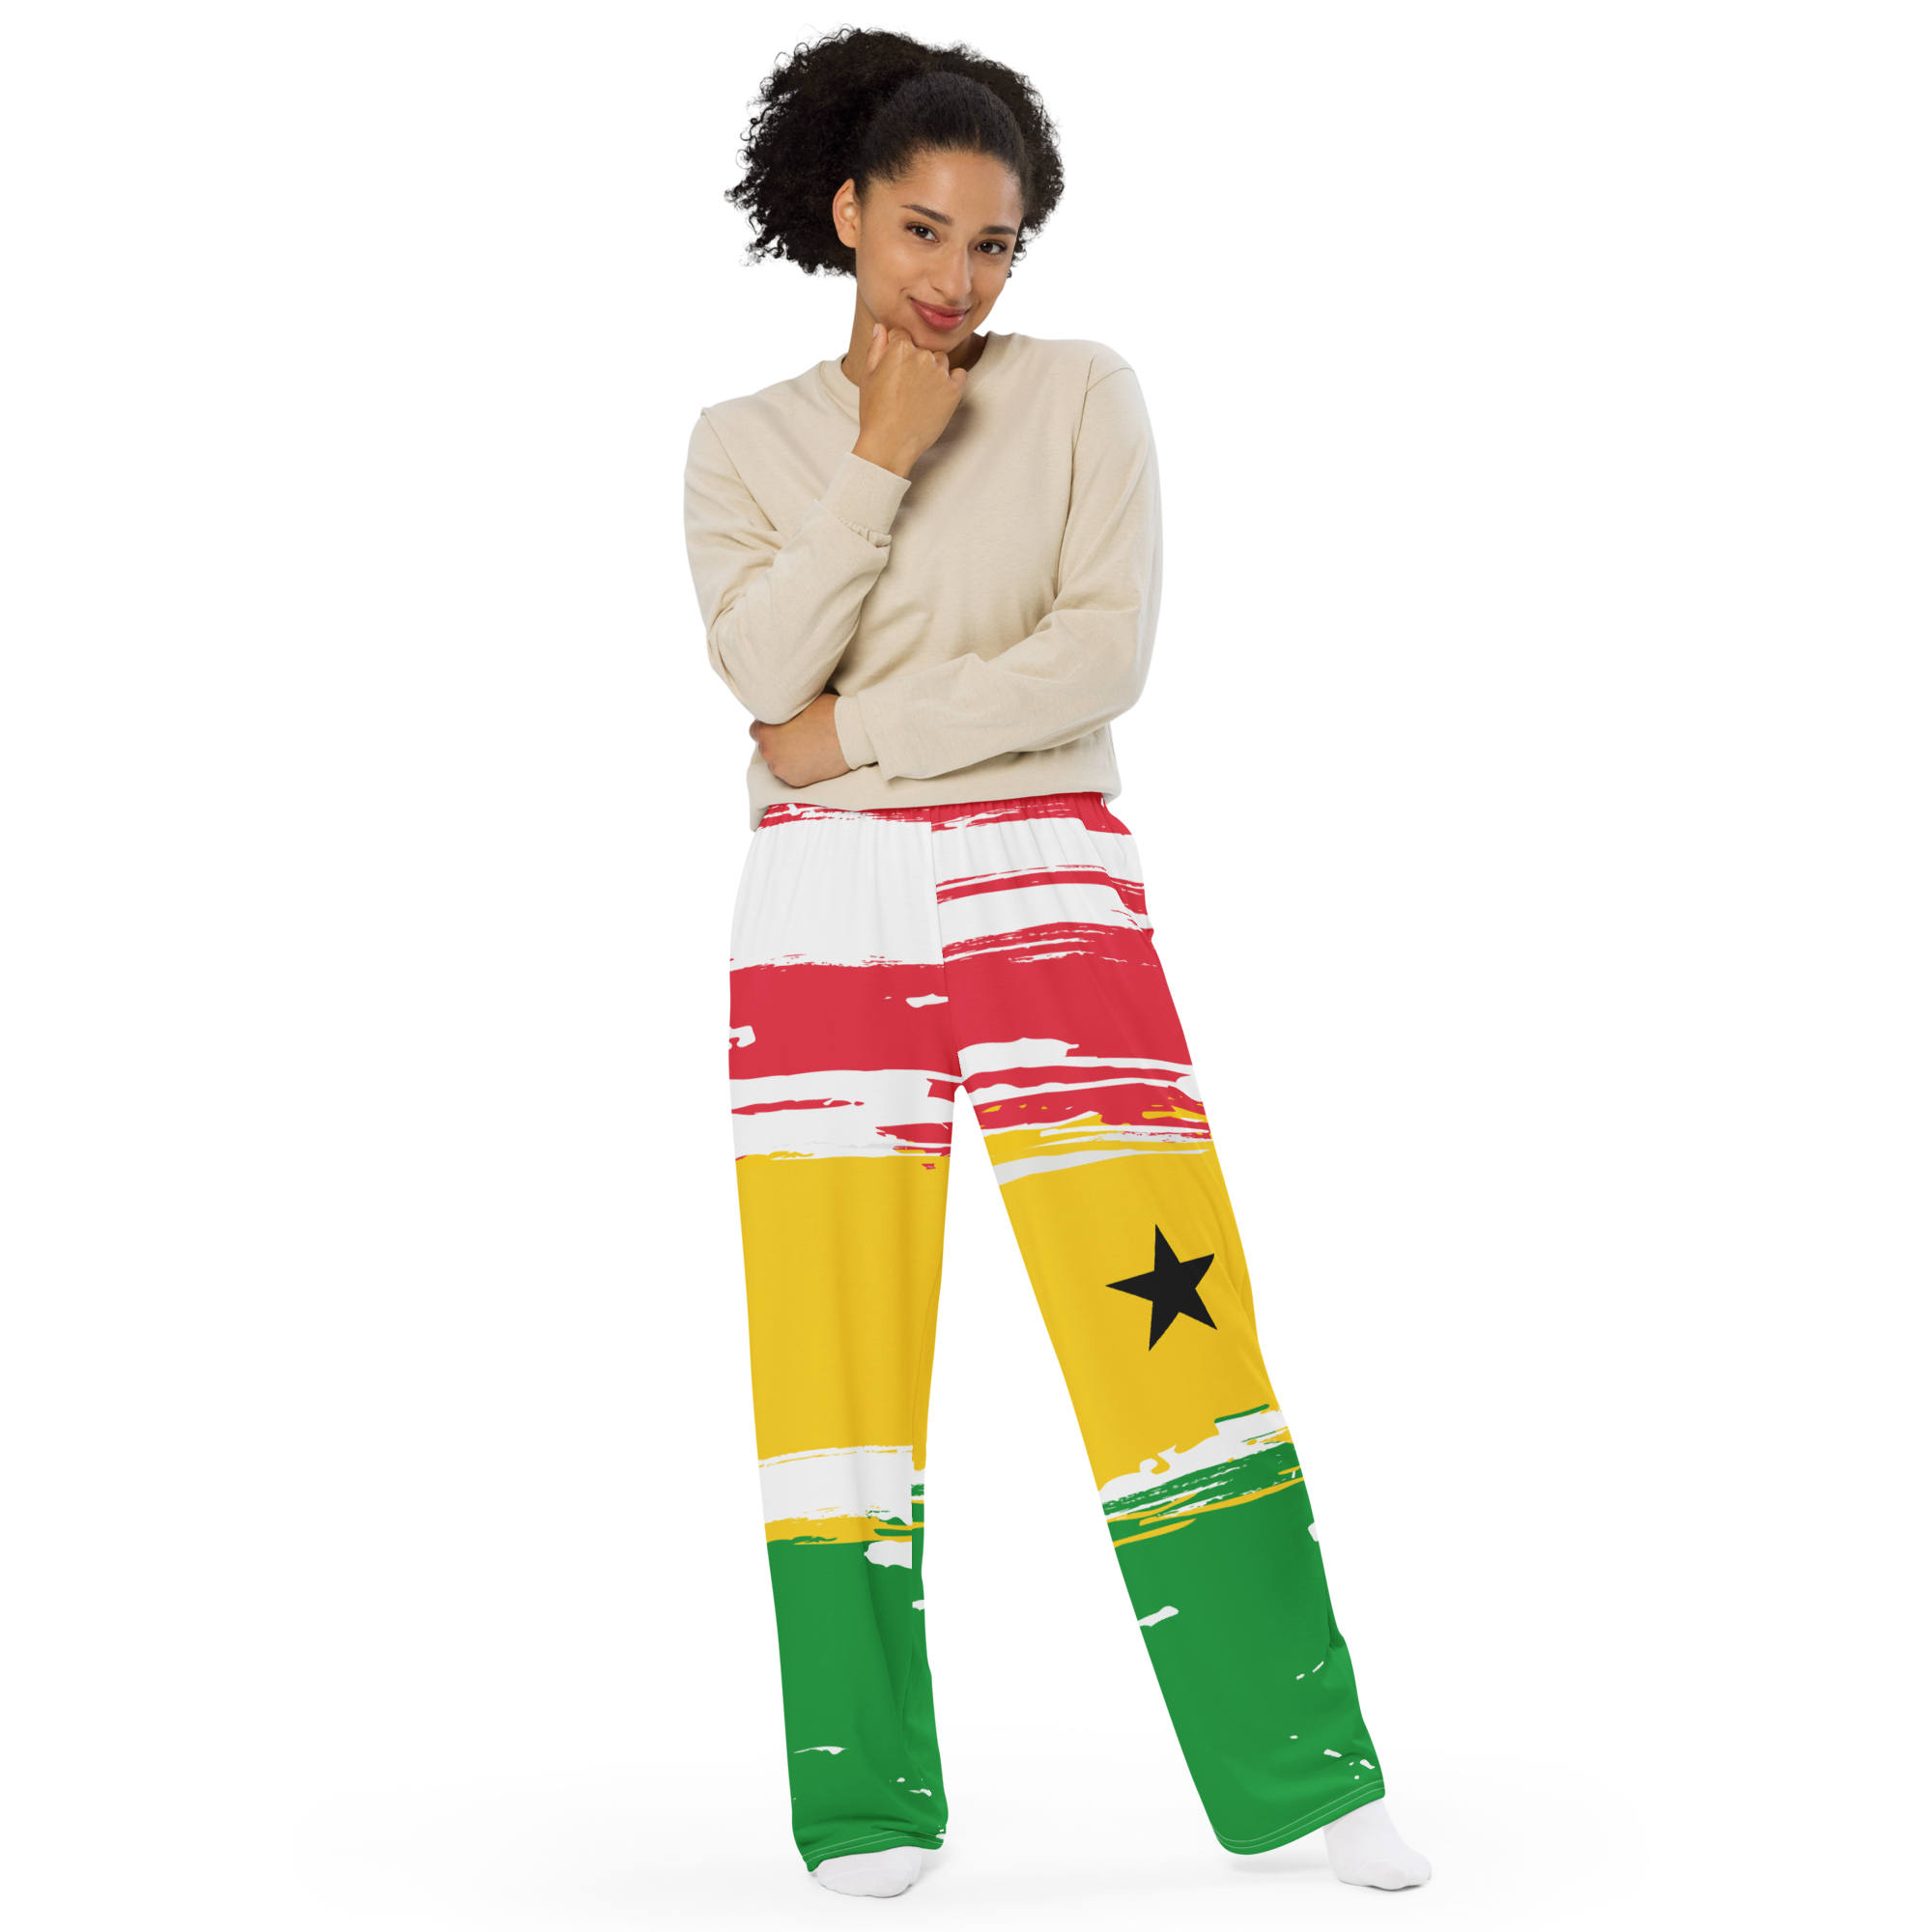 New 2023 arrivals! My colorful Ghana flag inspired unisex wide leg workout pants by Volleybragswag are the cutest workout clothes for volleyball players now sold on ETSY!